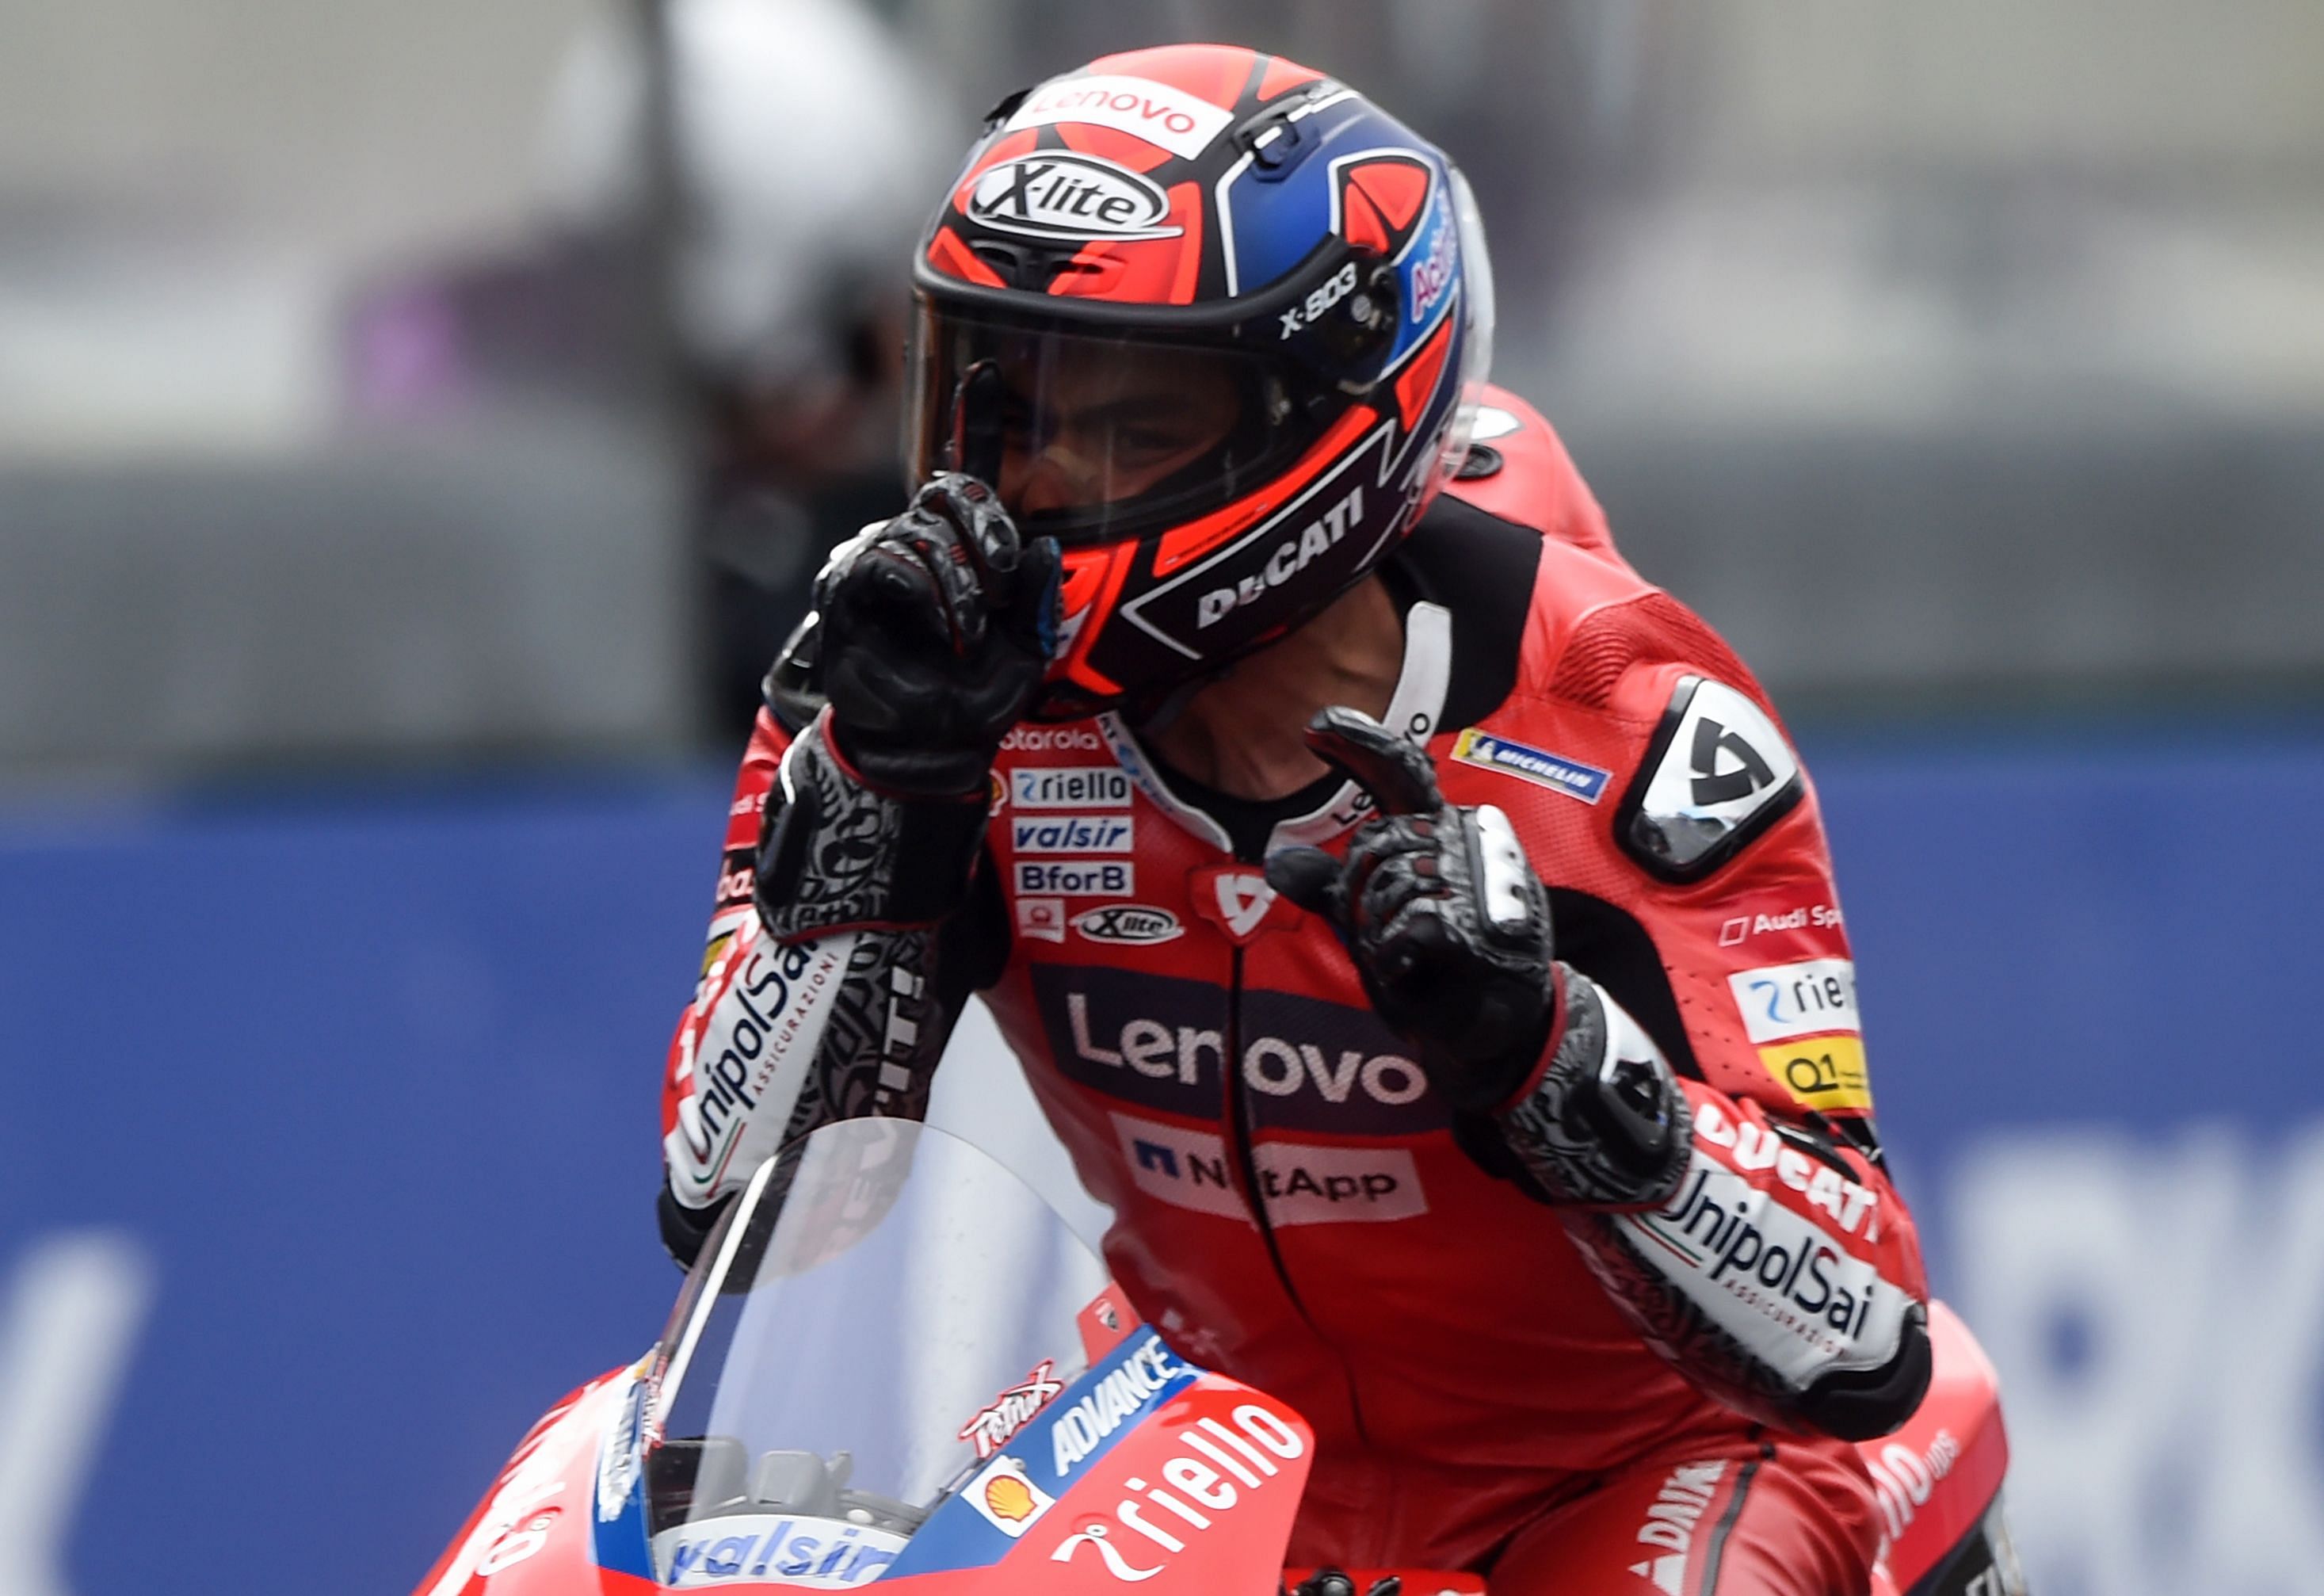 Ducati's Italian rider Danilo Petrucci celebrates as he crosses the finish line to wins in the French MotoGP race in Le Mans. Credits: AFP Photo